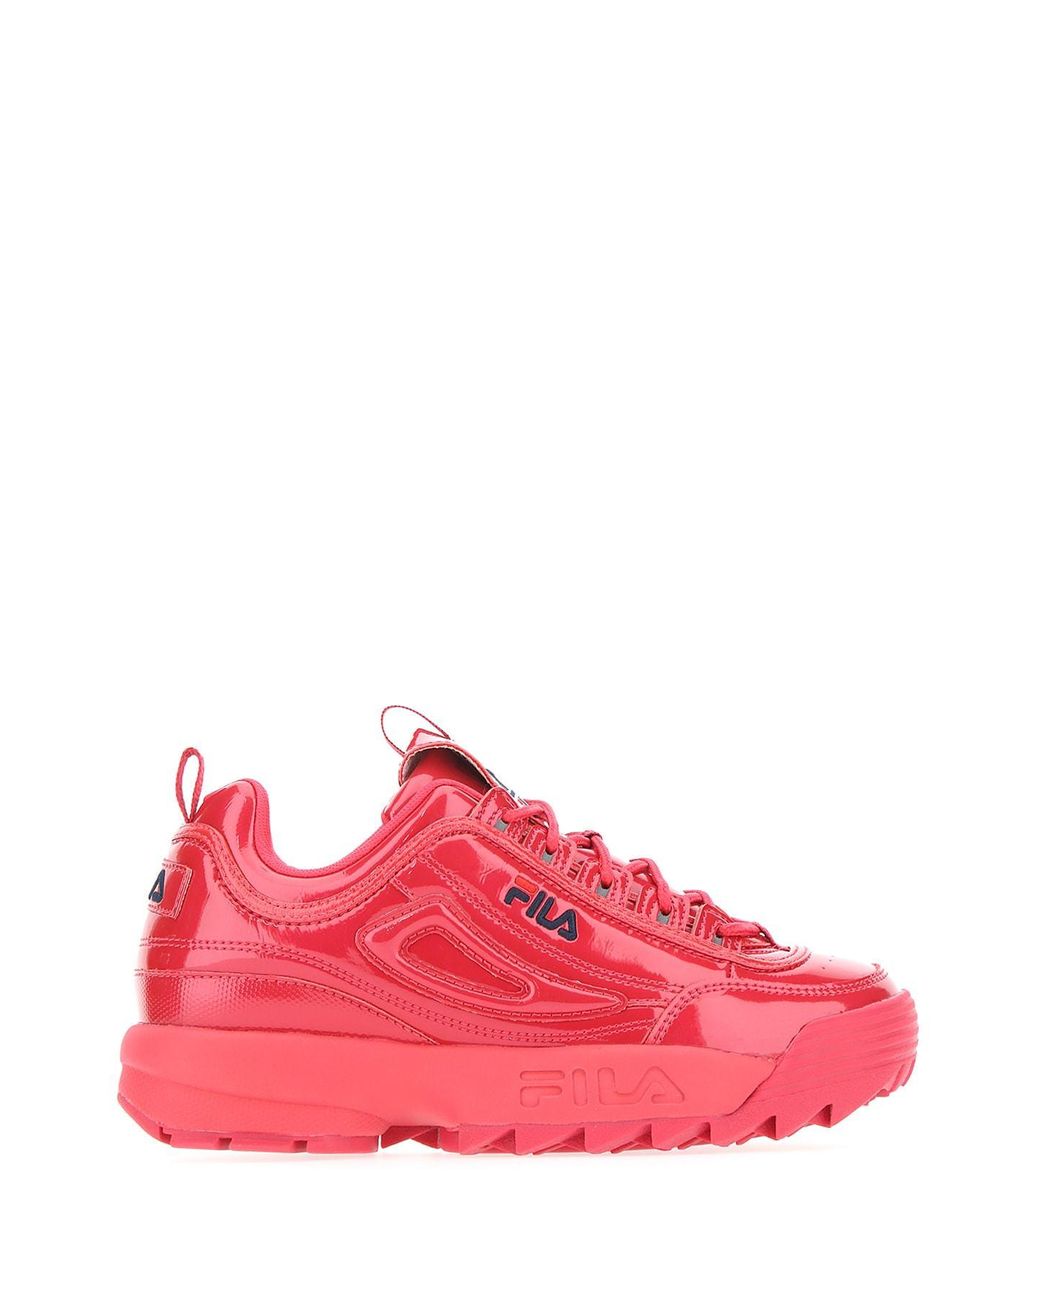 Fila Synthetic Disruptor Sneakers in Pink - Lyst